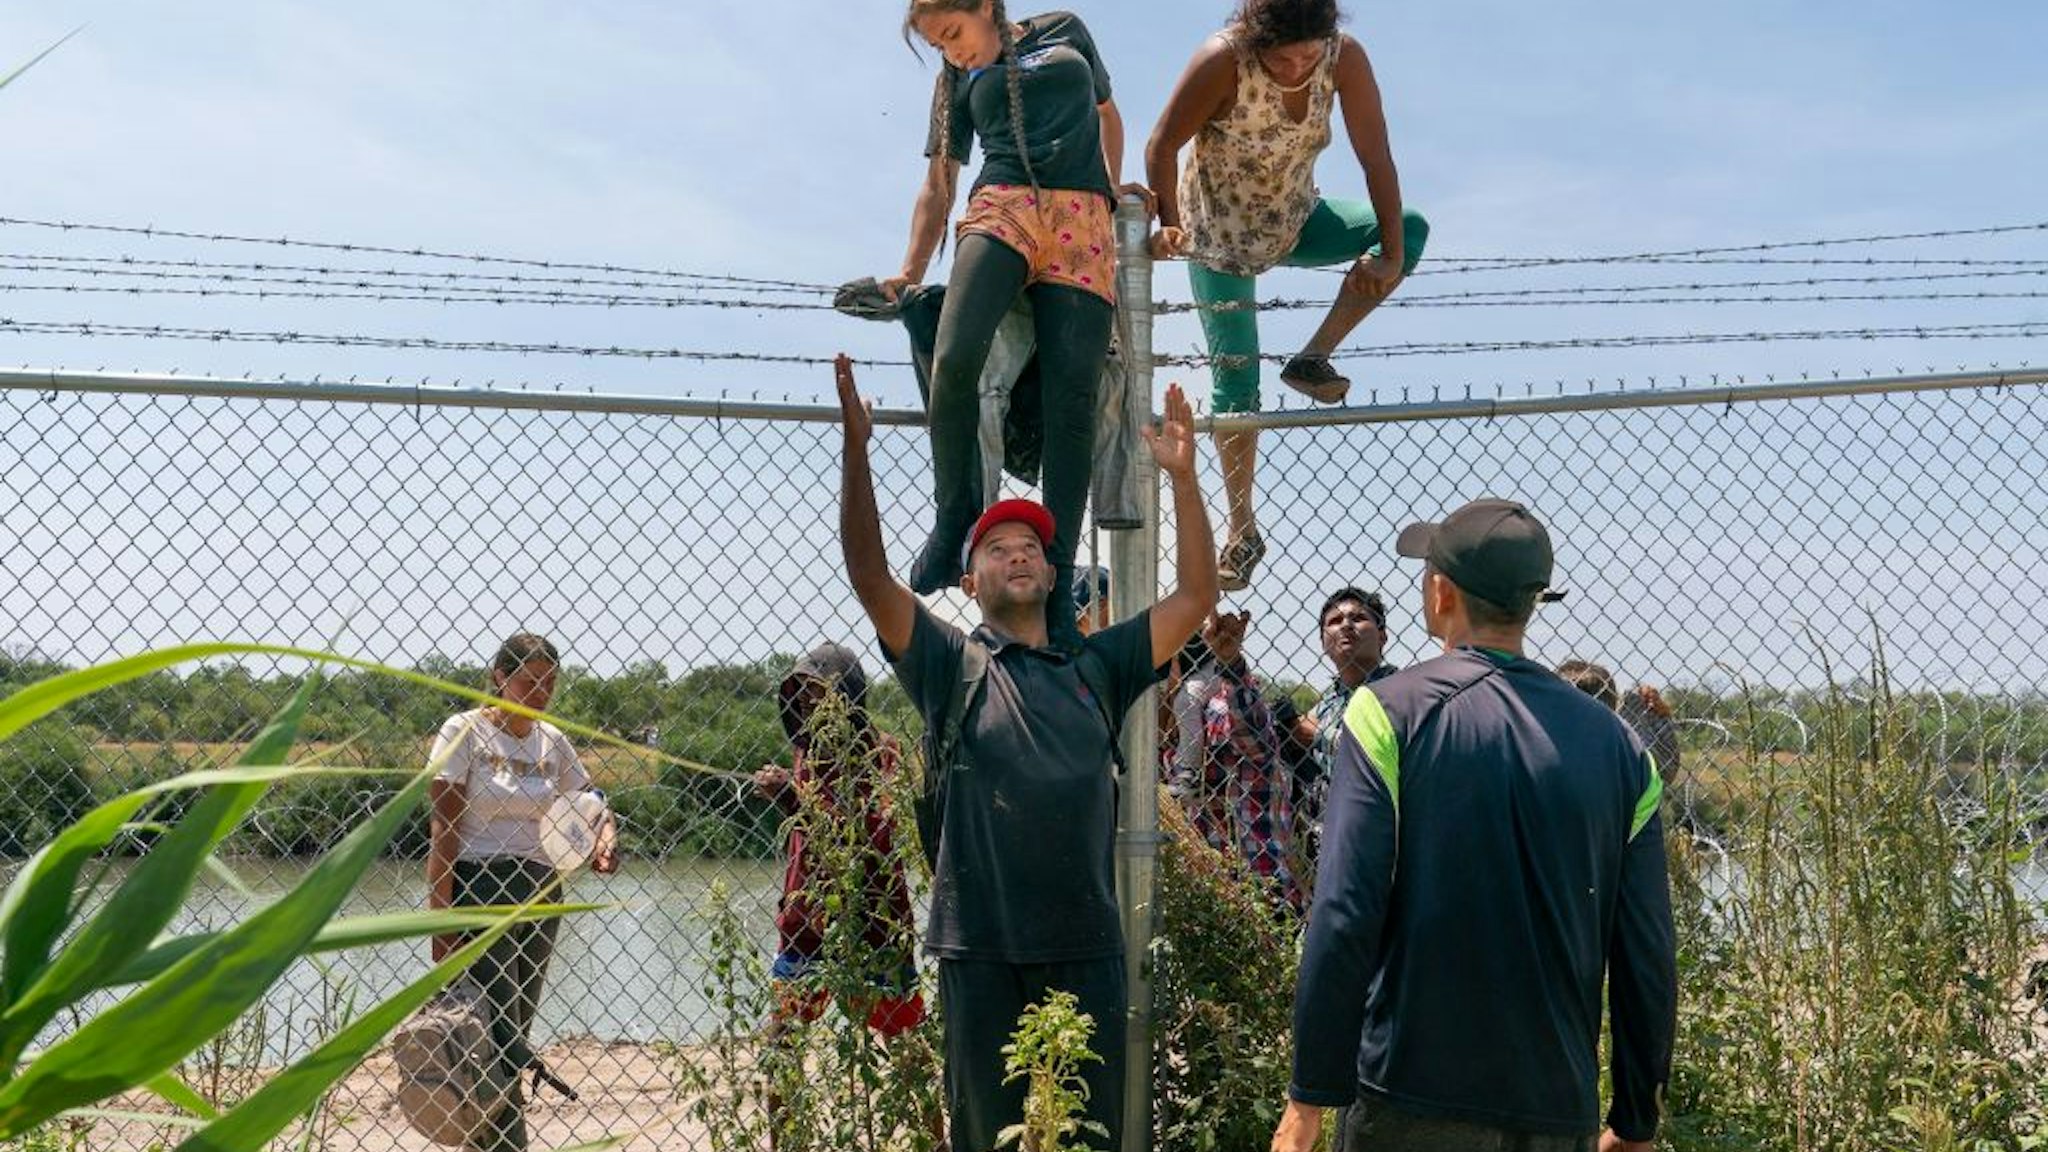 TOPSHOT - Migrants help each other climb over a barbed wire fence into the US from Mexico, in Eagle Pass, Texas, on August 25, 2023. With their two children on their shoulders, Wilfredo and Nataly jump into the Rio Grande from the Mexican shore. The water is up to their waists. They avoid the line of buoys that the state of Texas placed to block their passage and head for the United States. They cross from Piedras Negras, Coahuila state, and seek the opposite bank in Eagle Pass, a city in southern Texas whose governor, Republican Greg Abbott, has militarized the river to contain the entry of migrants. (Photo by SUZANNE CORDEIRO / AFP) (Photo by SUZANNE CORDEIRO/AFP via Getty Images)